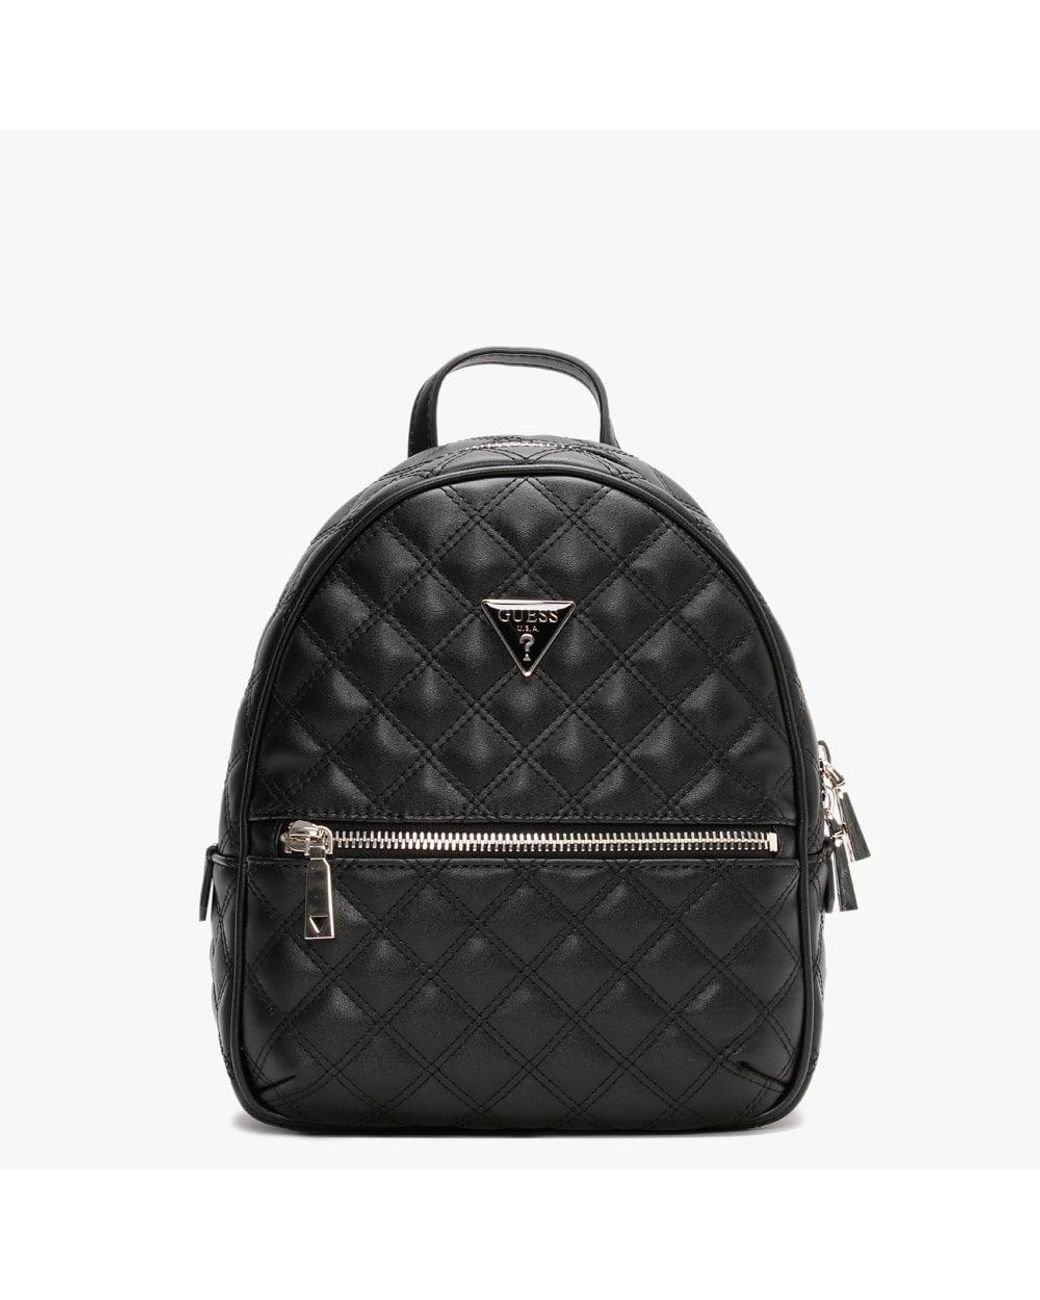 Guess Cessily Quilted Black Backpack | Lyst Australia